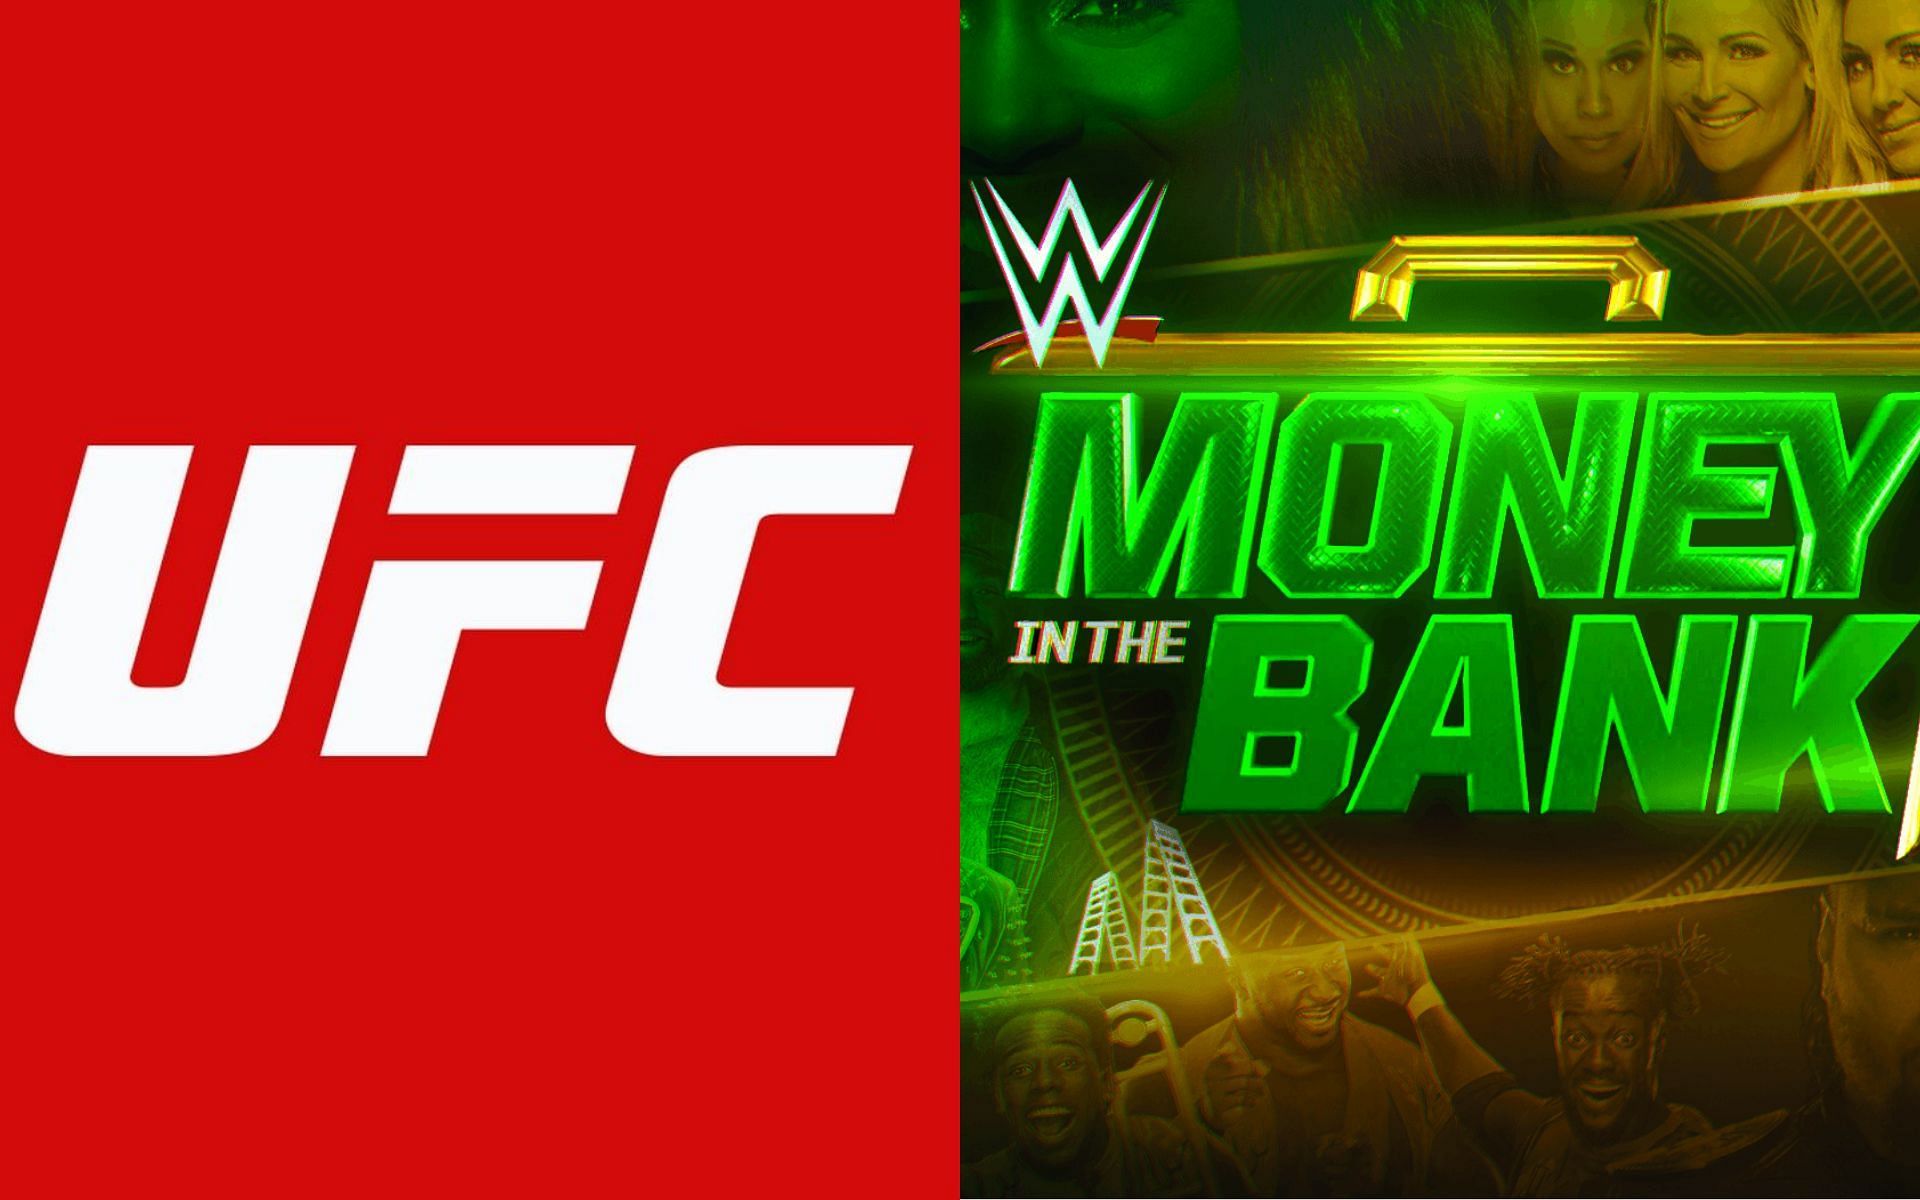 UFC&#039;s international fight week event will likely clash with WWE&#039;s annual PPV &#039;Money in the Bank&#039;